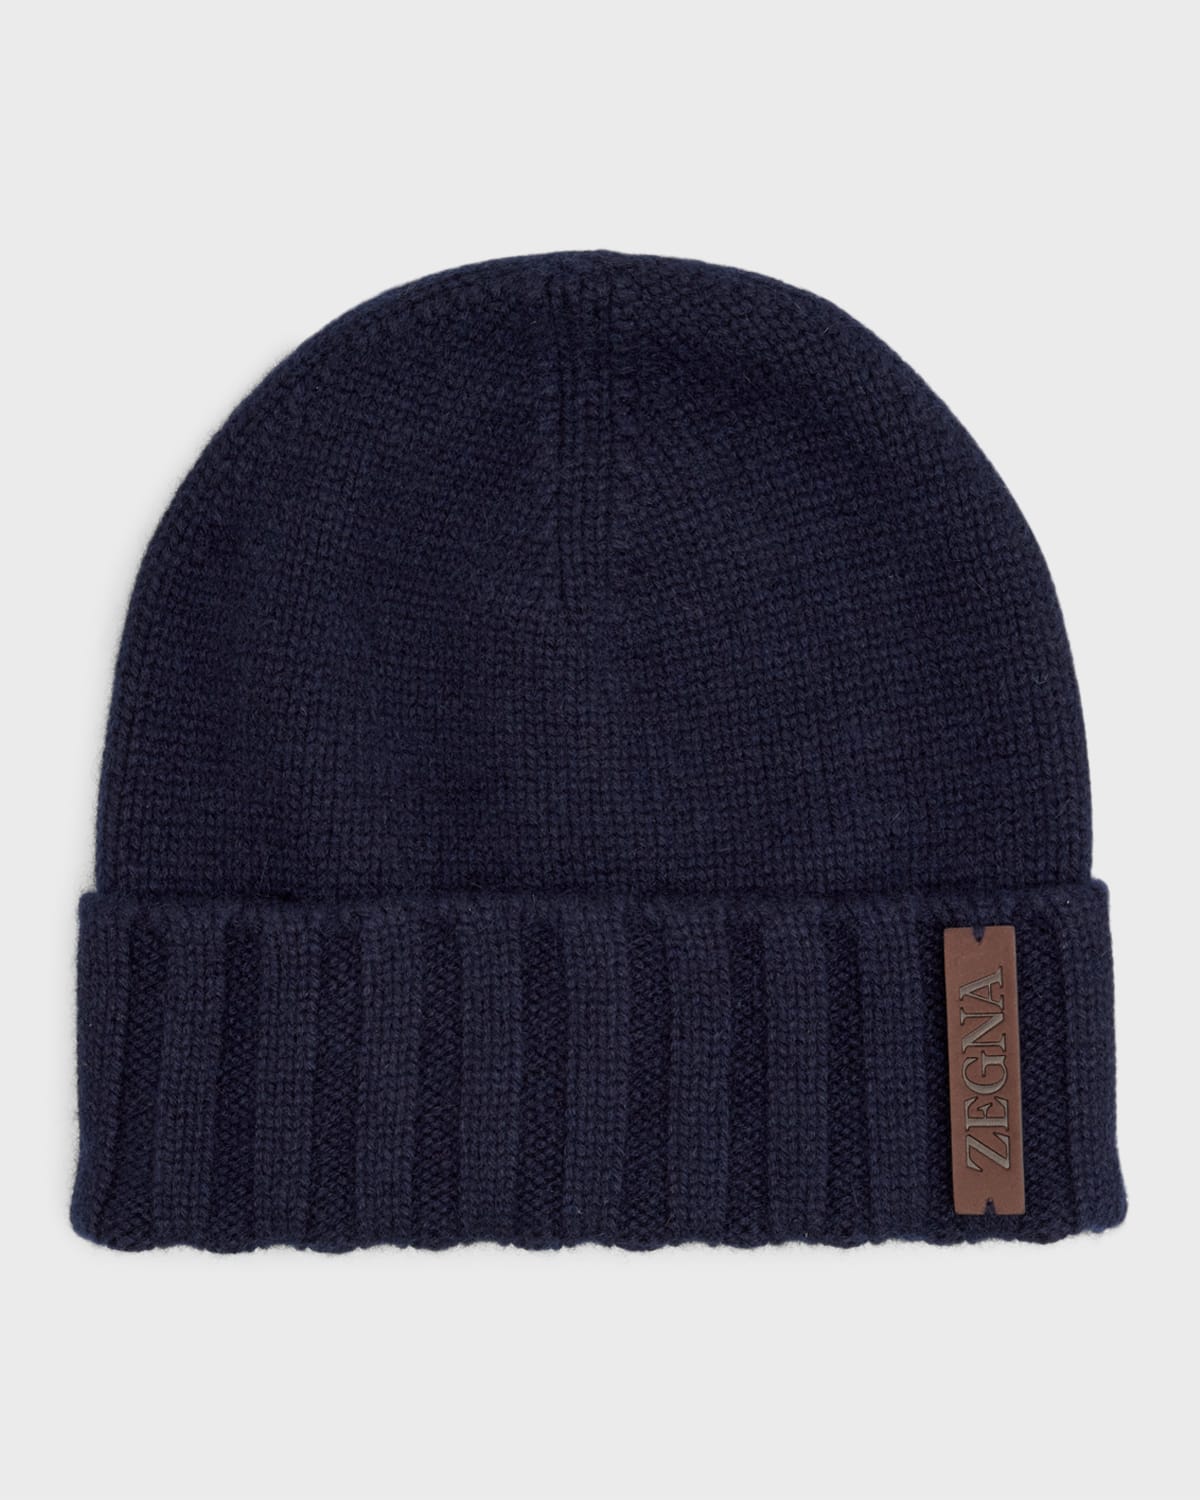 Zegna Men's Leather-logo Cashmere Beanie Hat In Navy Solid